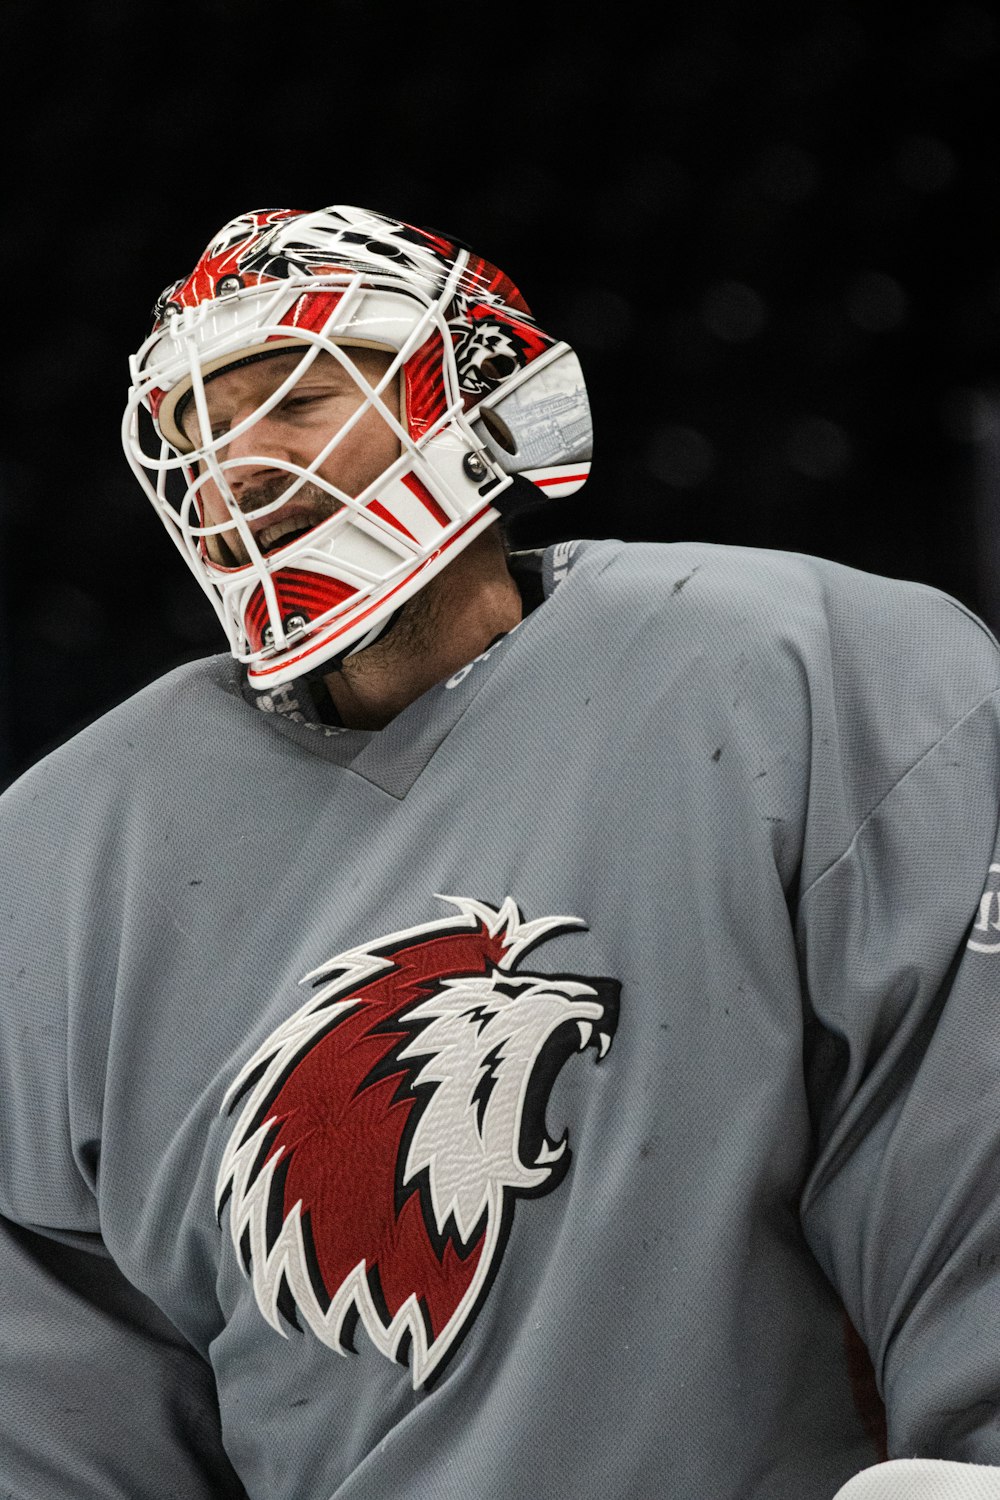 a close up of a hockey goalie wearing a mask